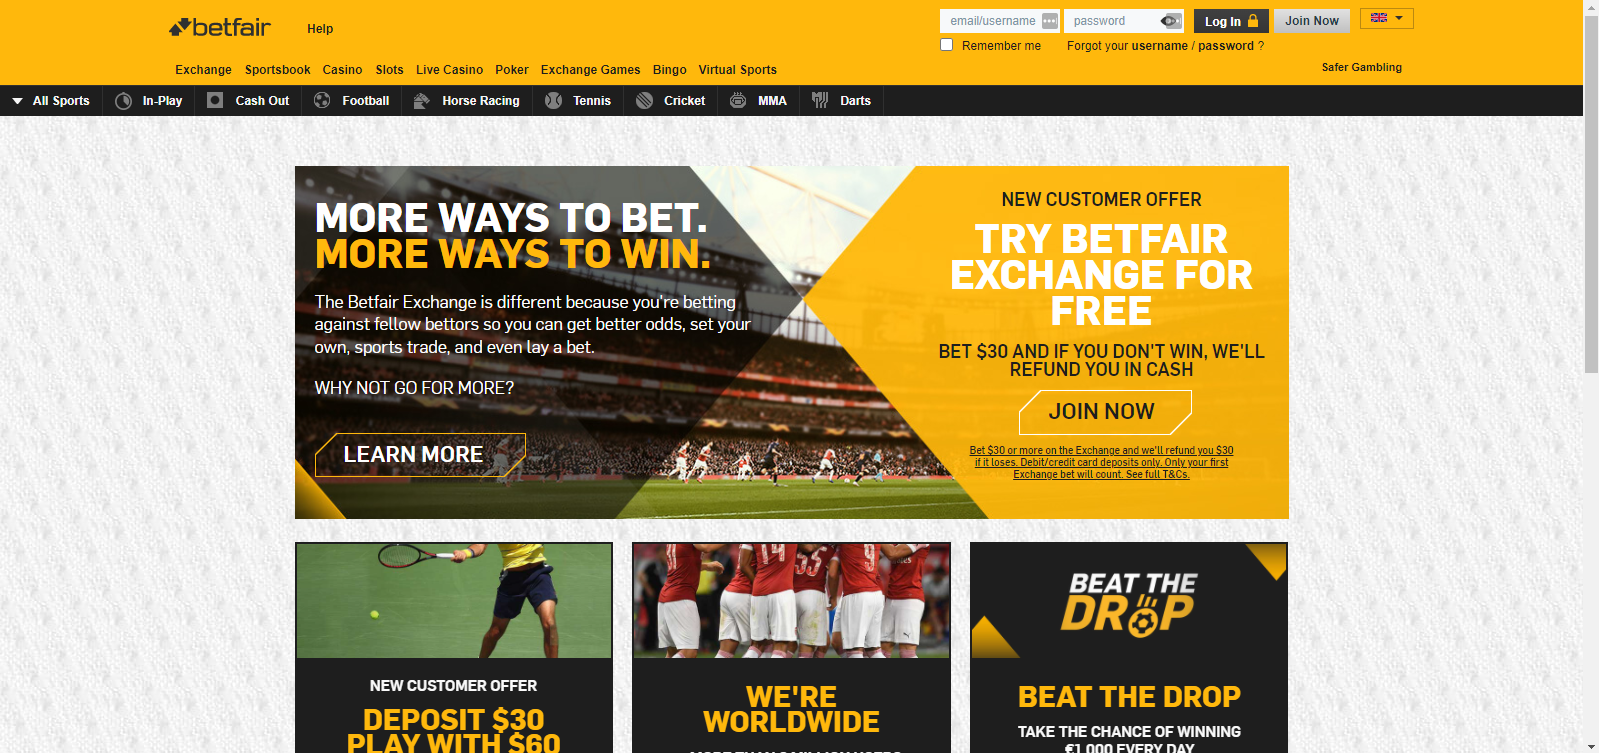 A beautiful Betfair official website for betting on different sports